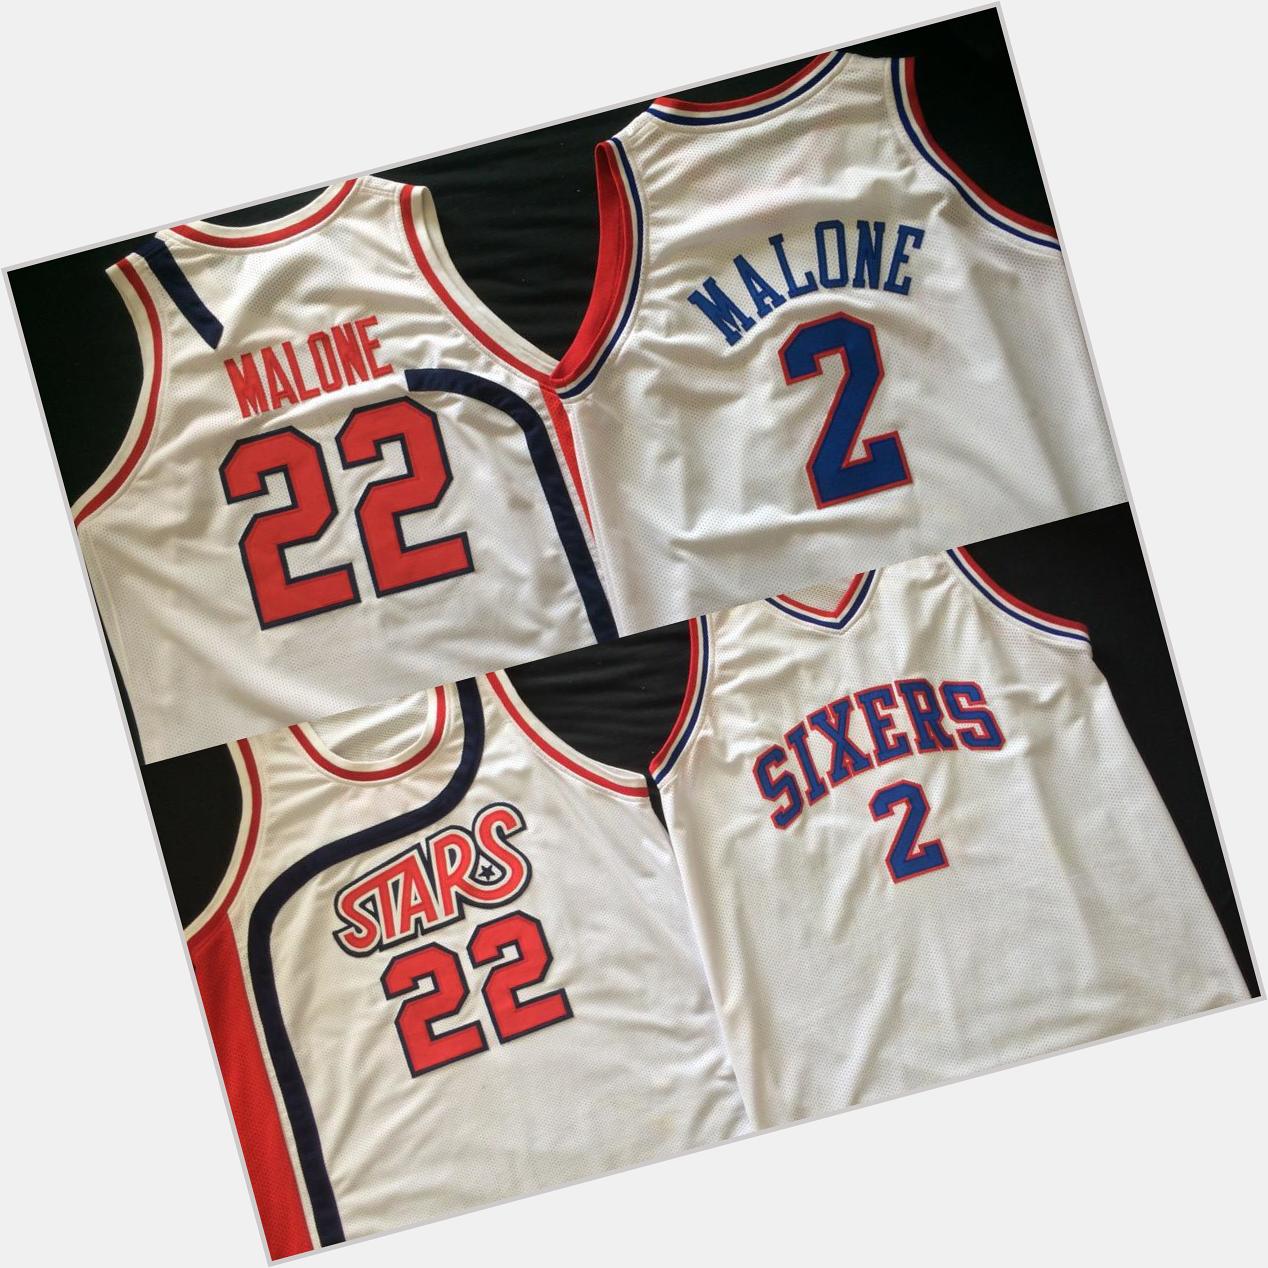 Happy Bday Moses Malone. Most underrated Center ever. Glad I own some of your jerseys.   